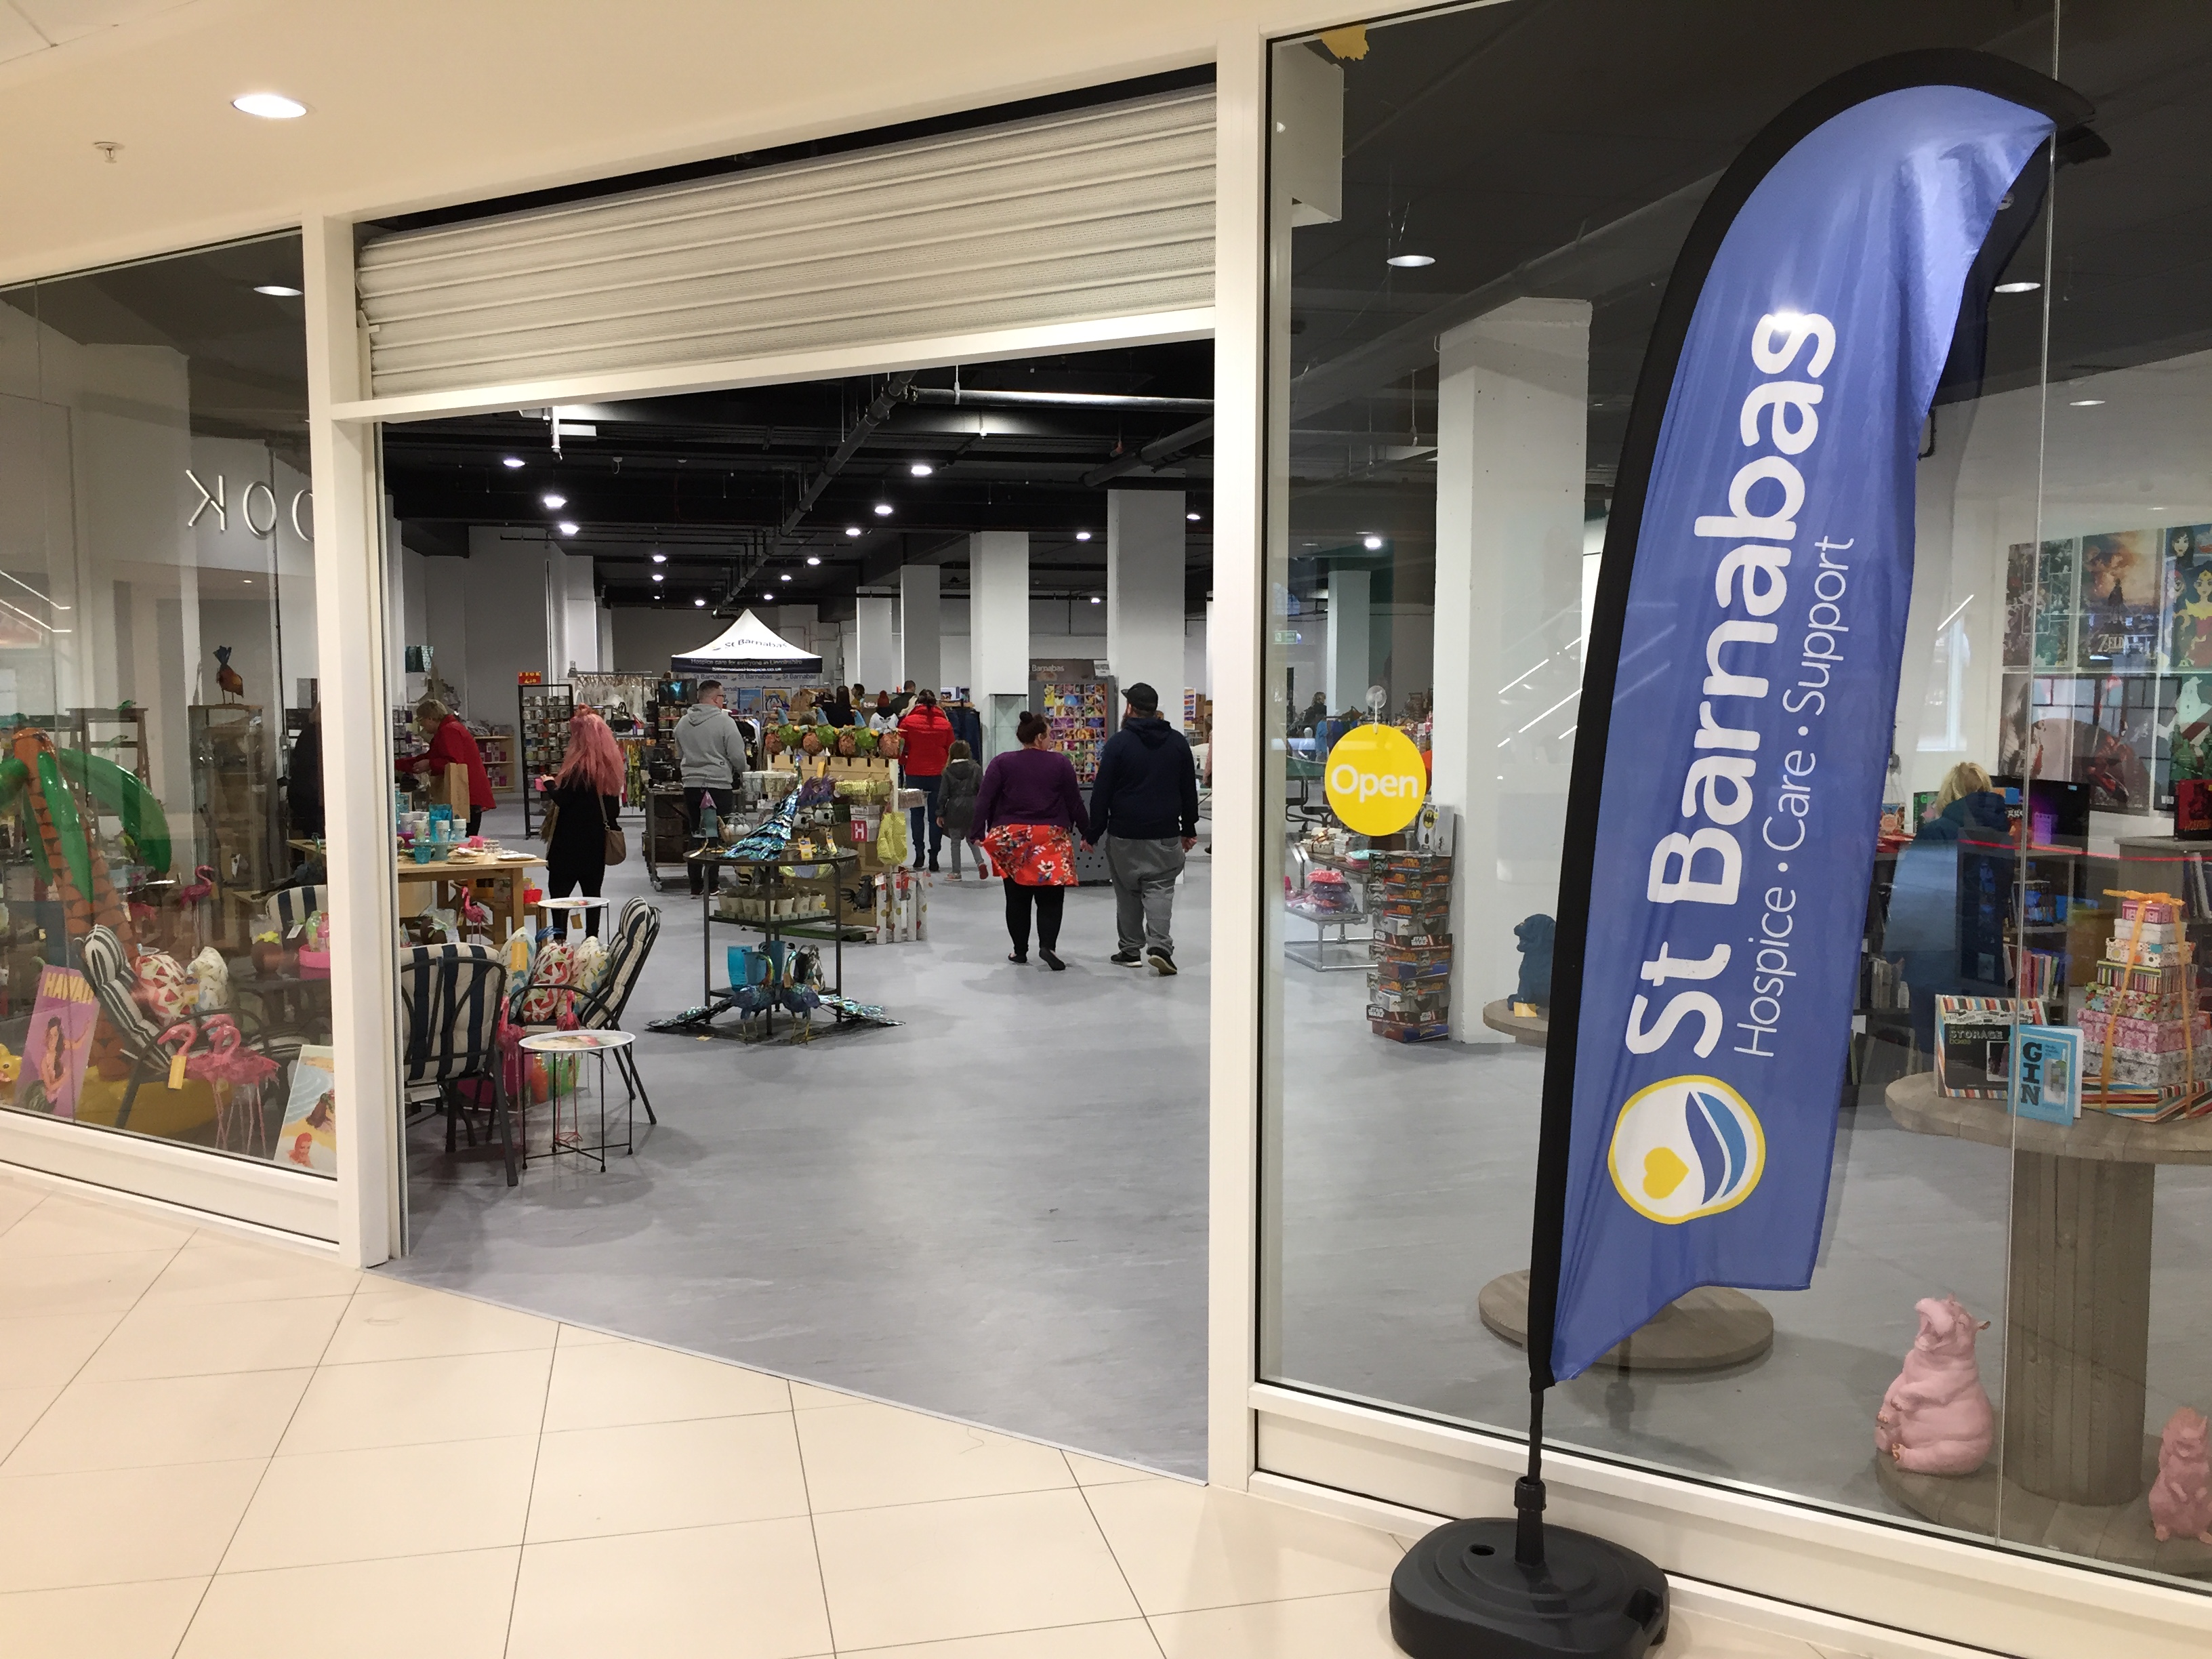 St. Barnabas pop-up shop in Waterside Shopping Centre